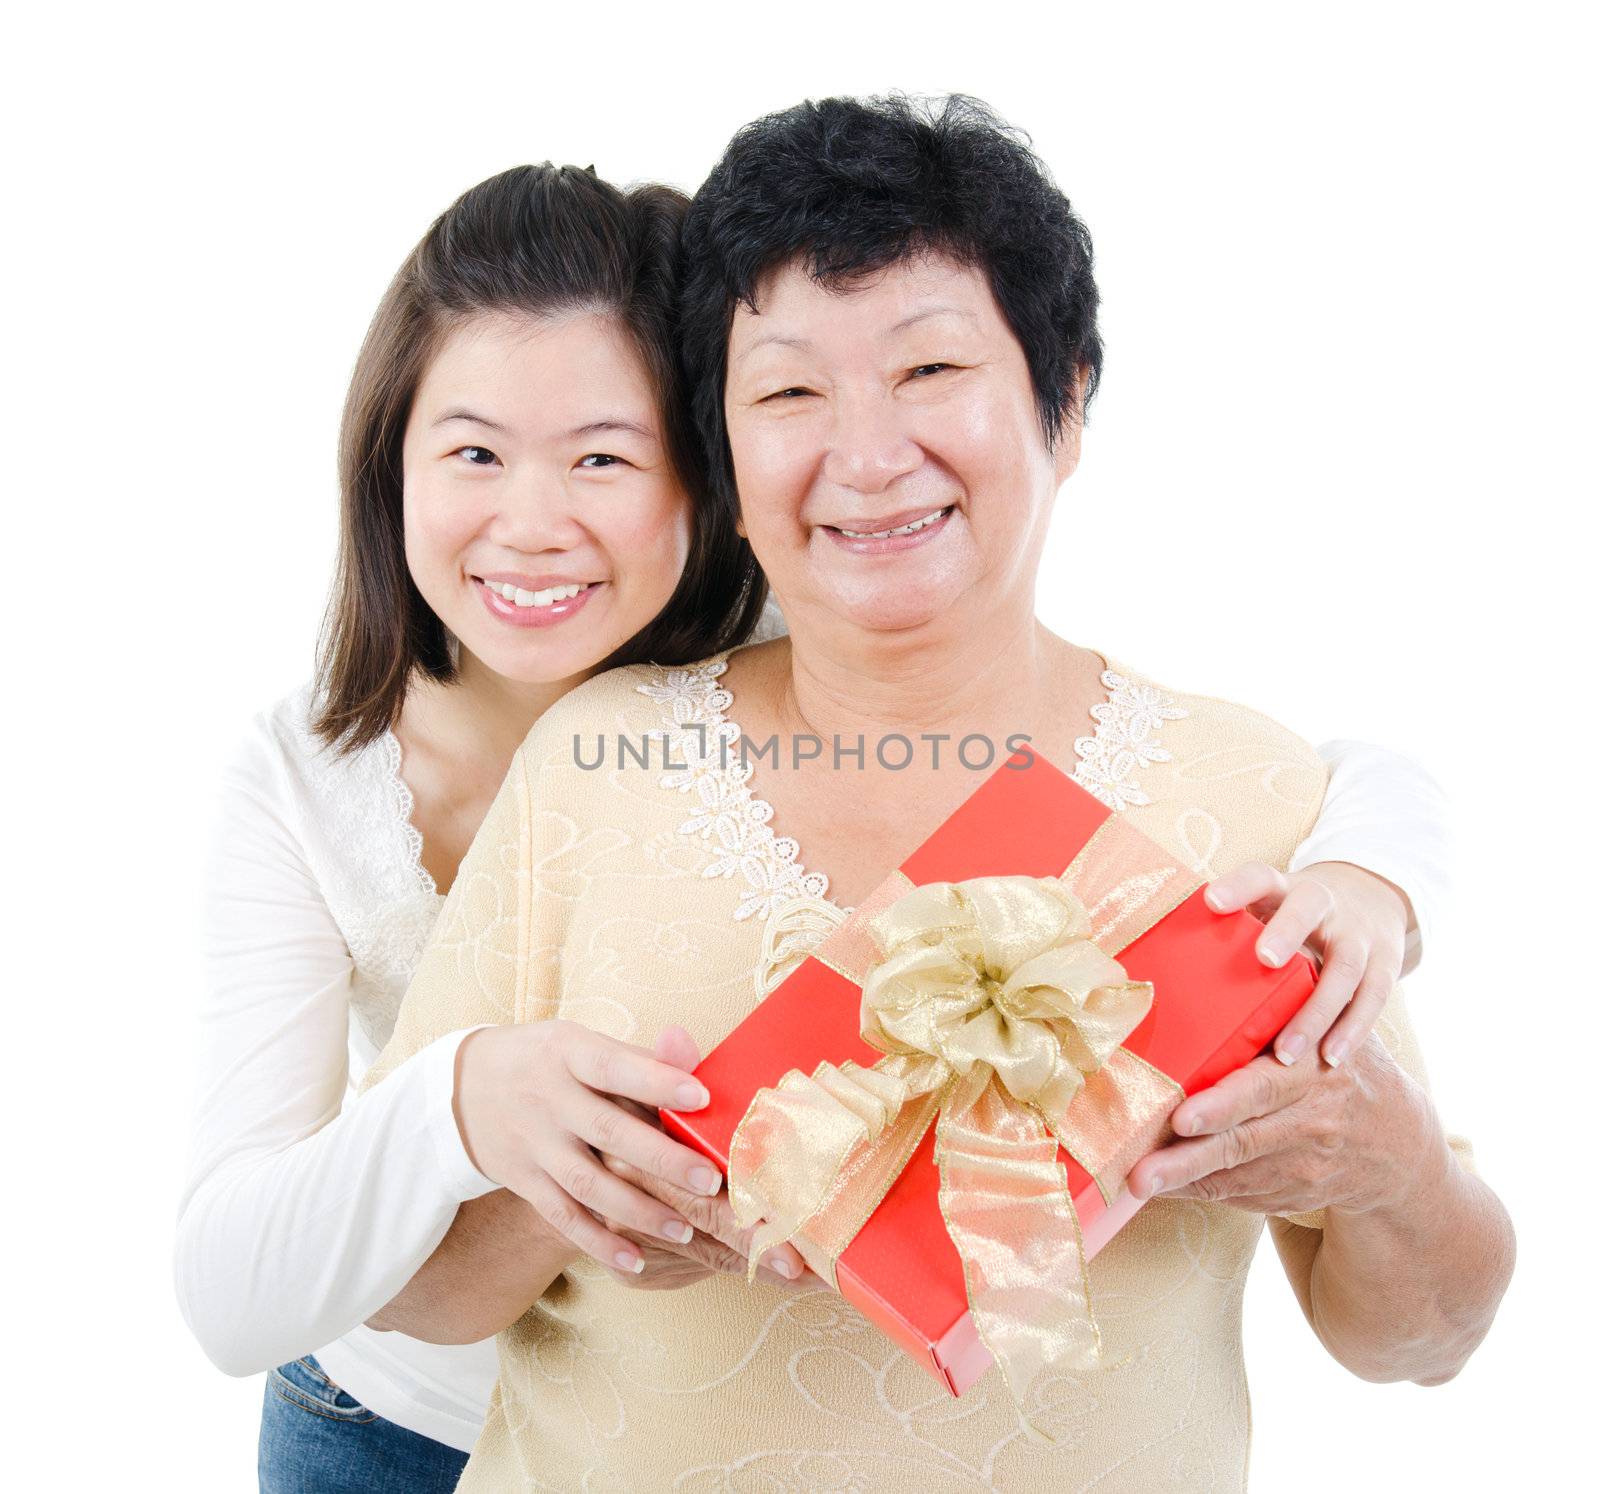 Asian parent and adult offpring holding a gift box smiling, isolated on white background.